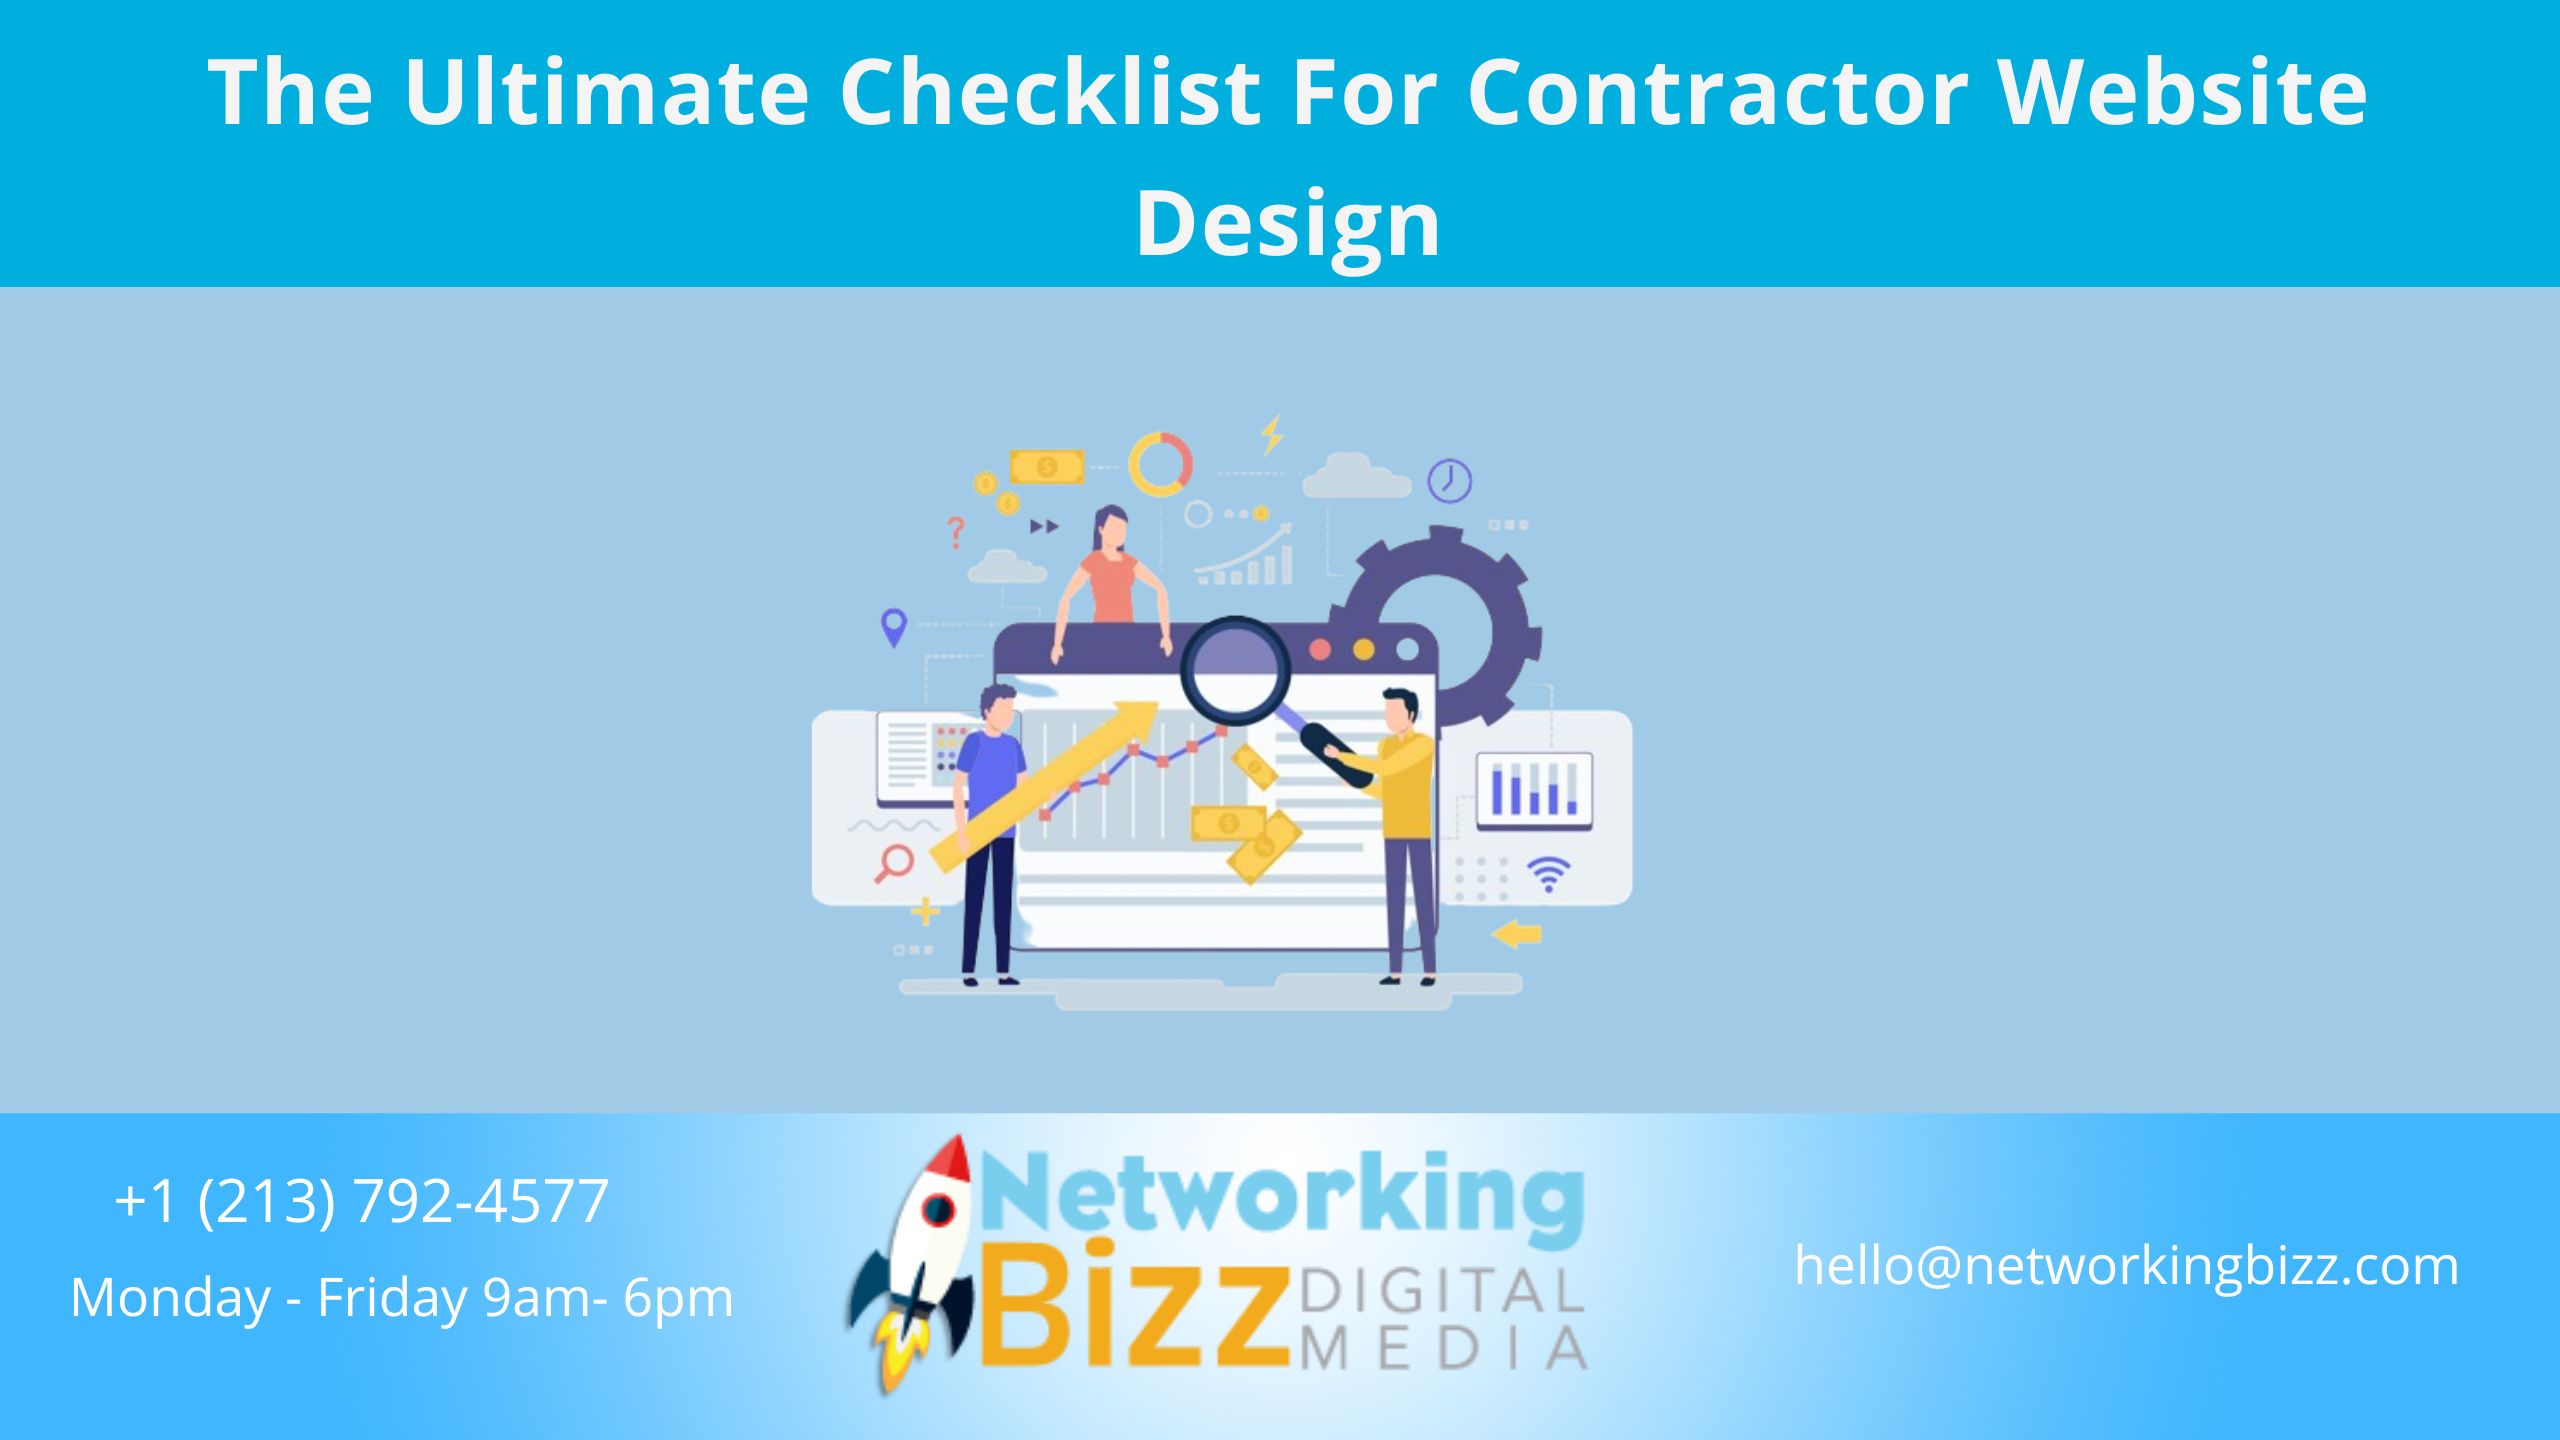 The Ultimate Checklist For Contractor Website Design